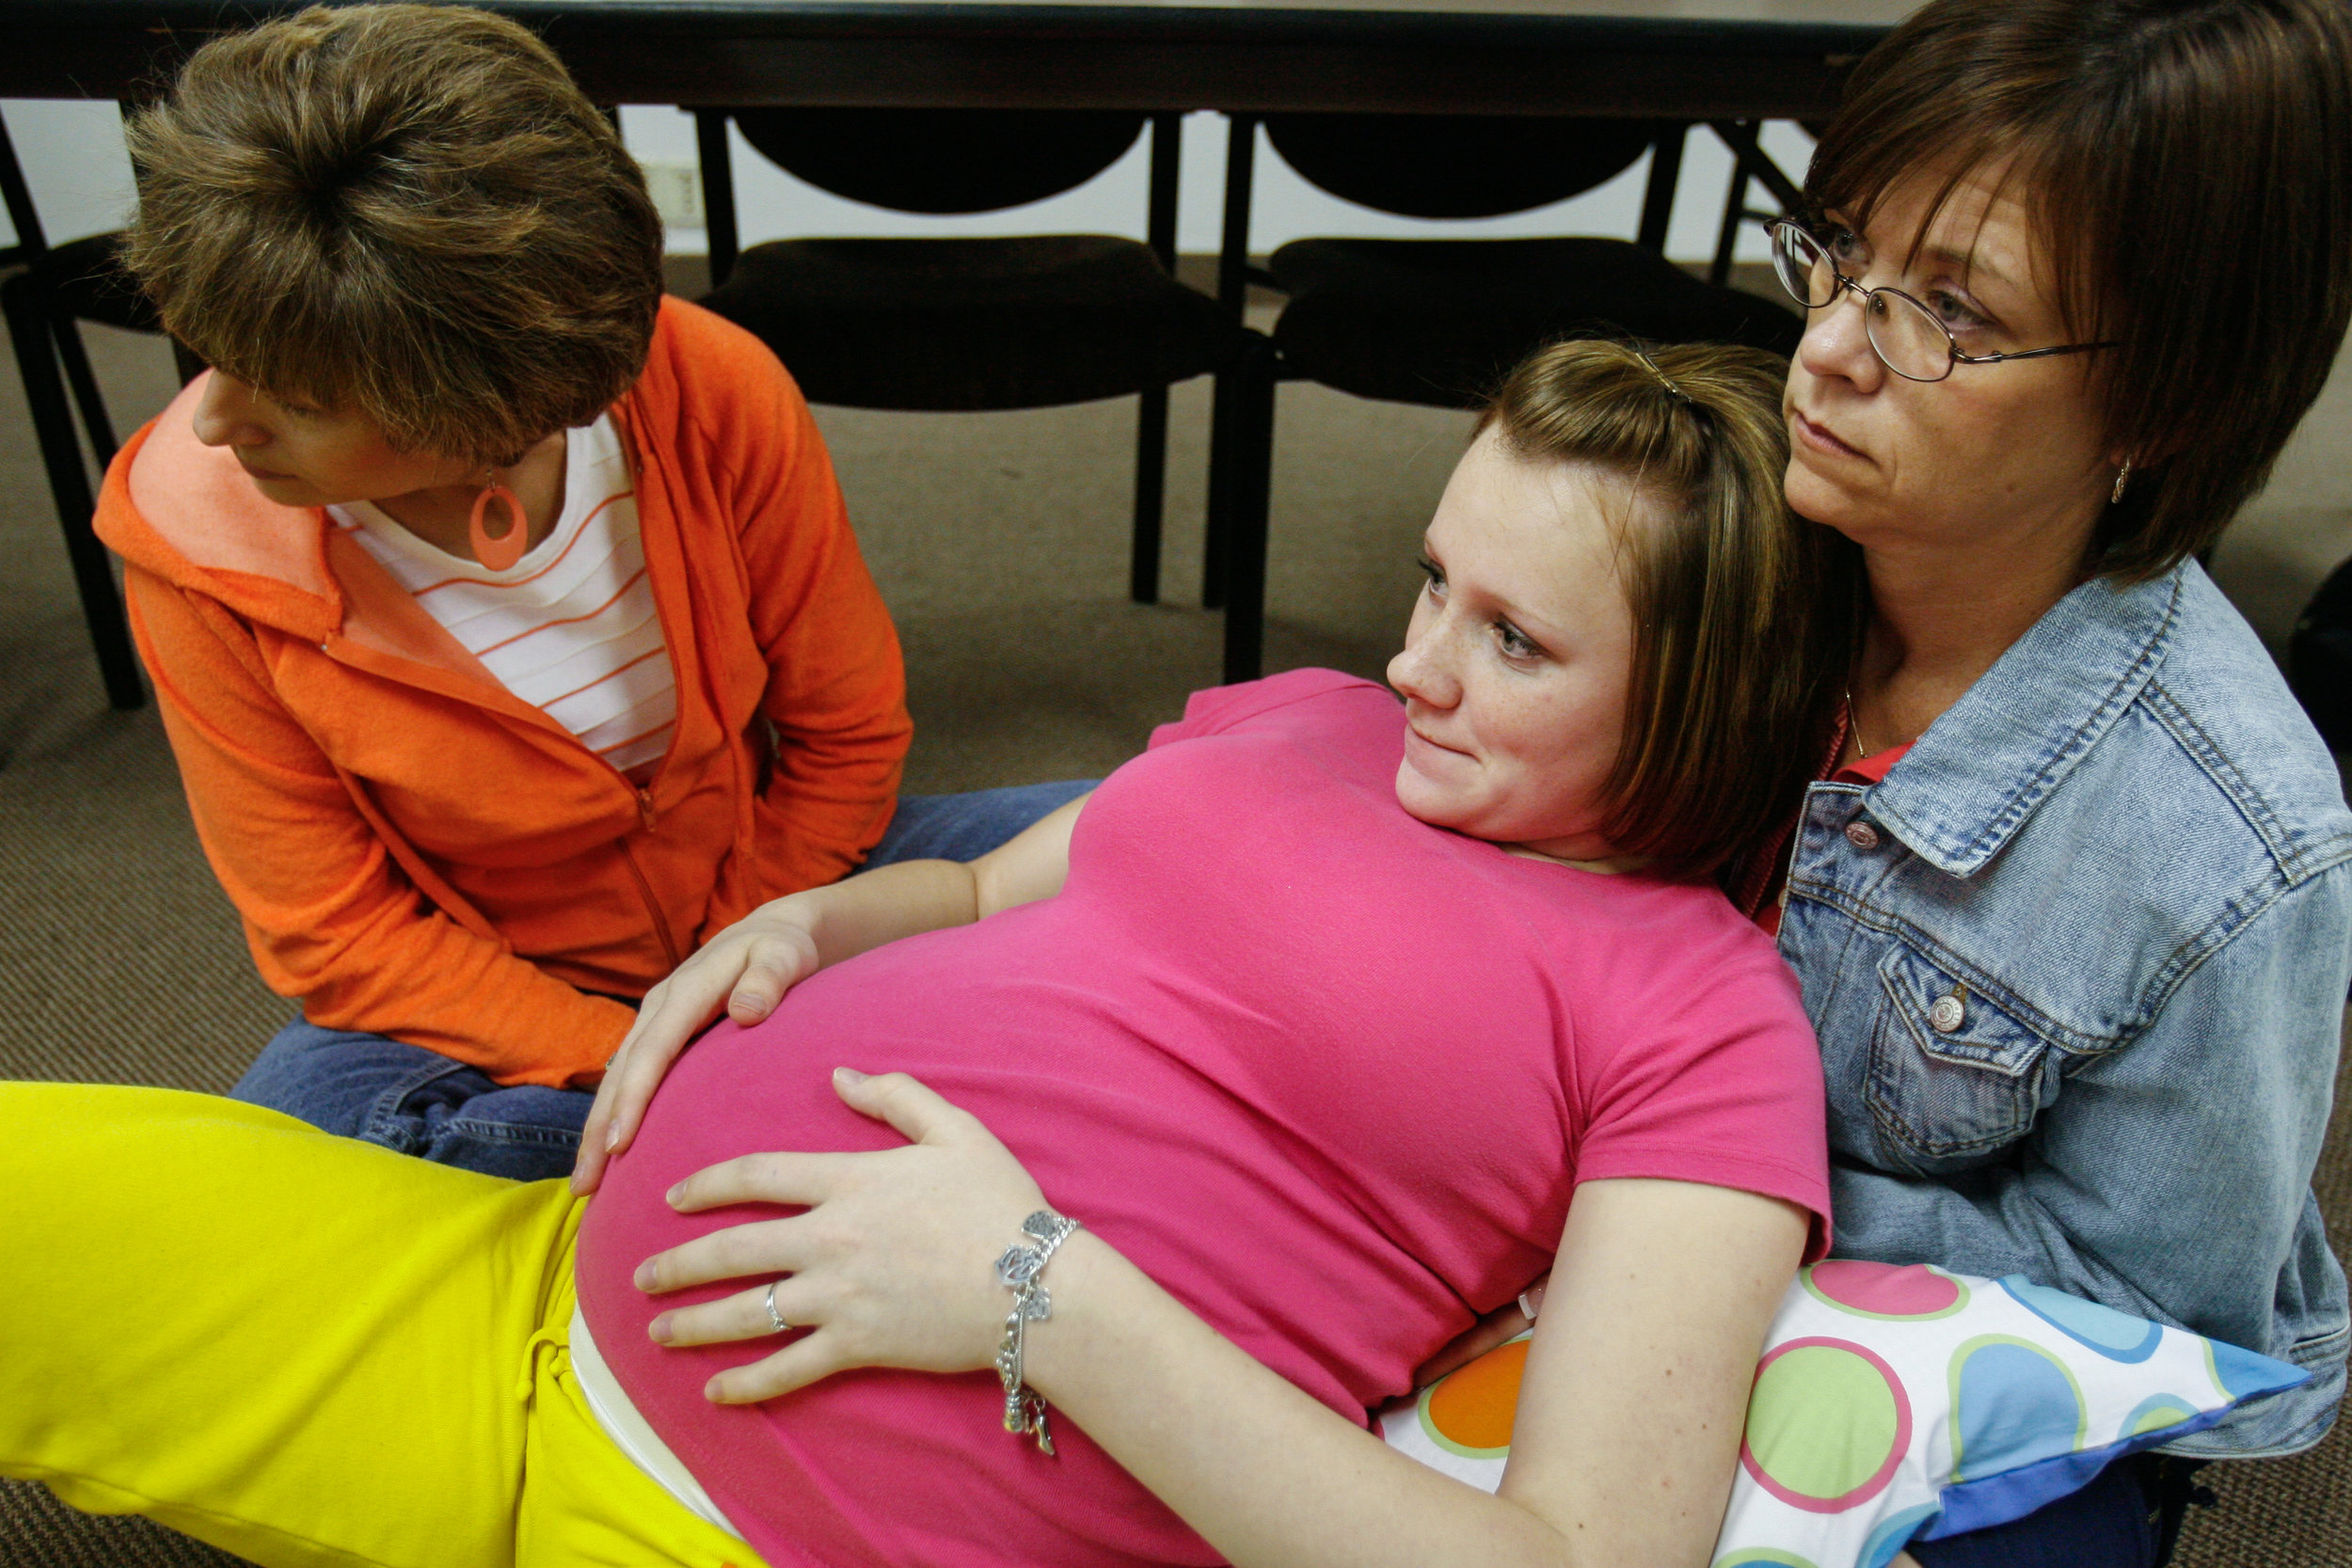  Amy Saulsbury, 17, center, practices different positions for labor with her coaches during a birthing class  March 13, 2008, at Medical Center Hospital in Odessa, Texas. Her coaches were her mother, Jill Saulsbury, right, and family friend Cindy Fry